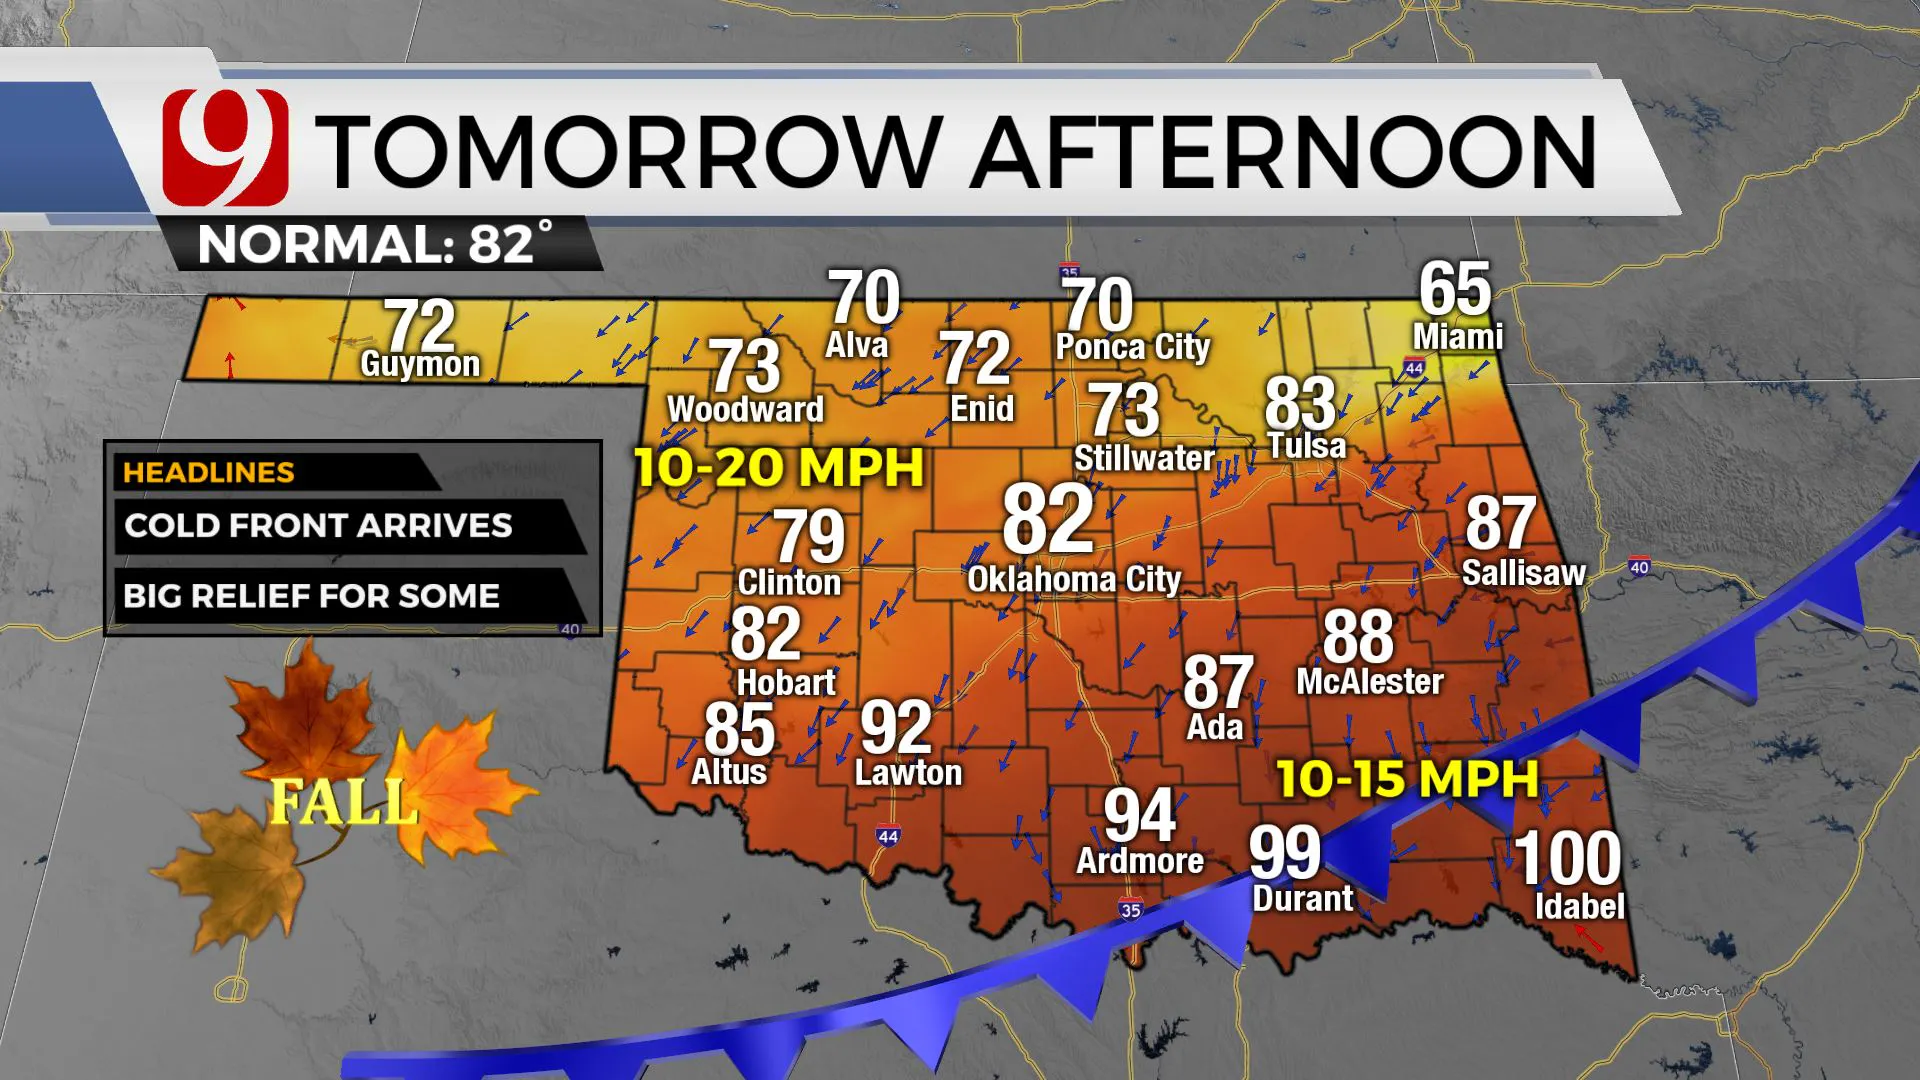 Temps and winds tomorrow afternoon.